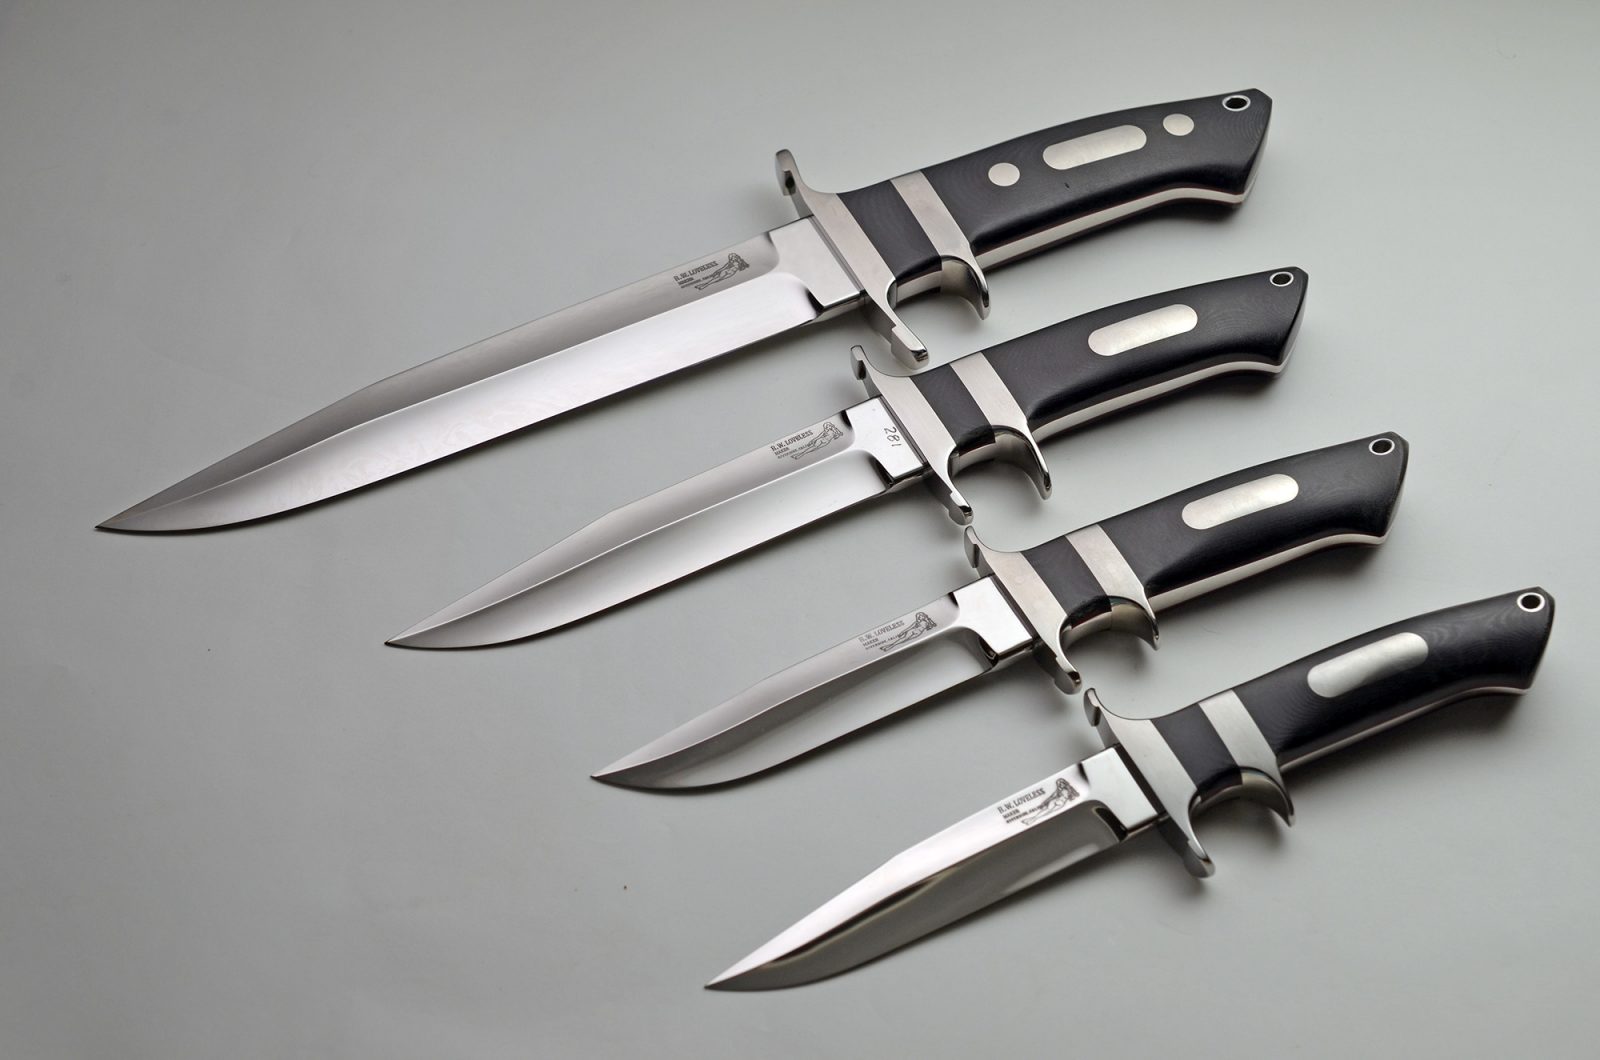 knife collection - psychology of collecting knives concept image